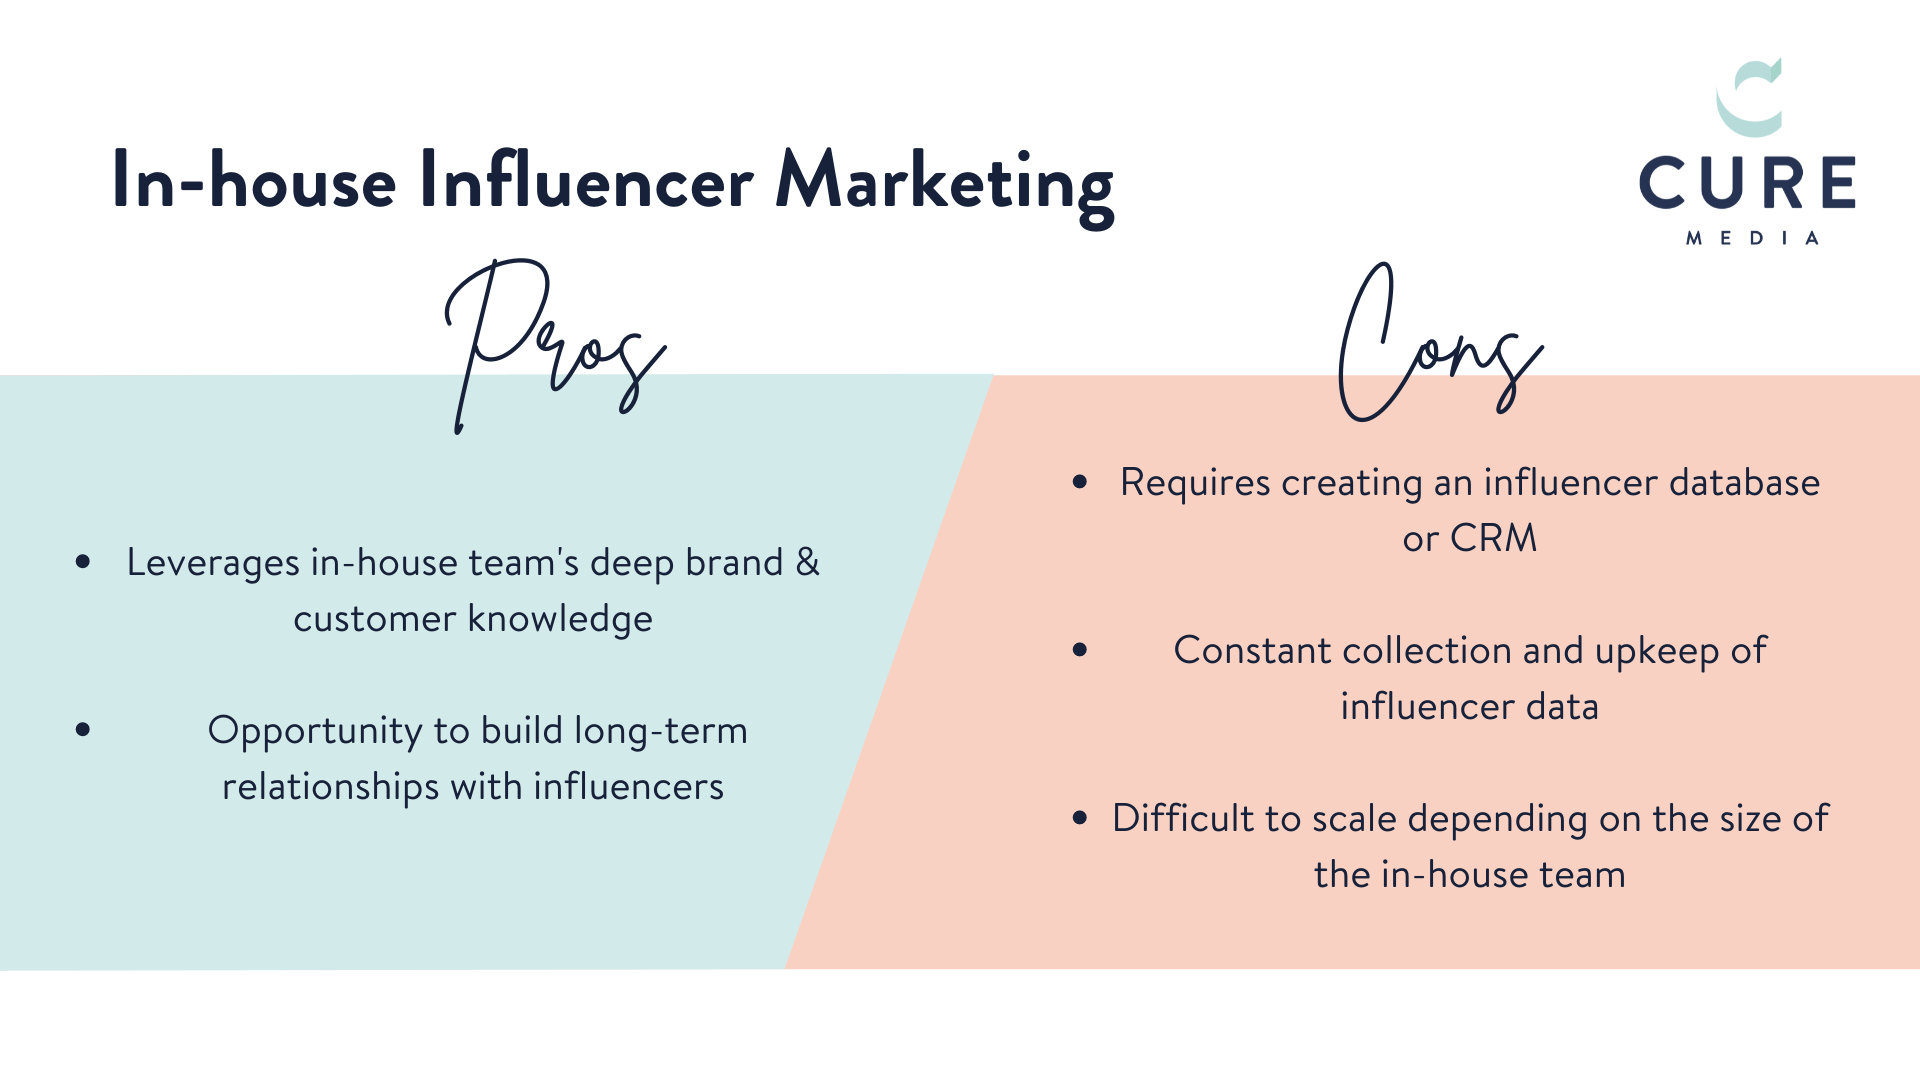 Pros and cons of using in-house influencer marketing